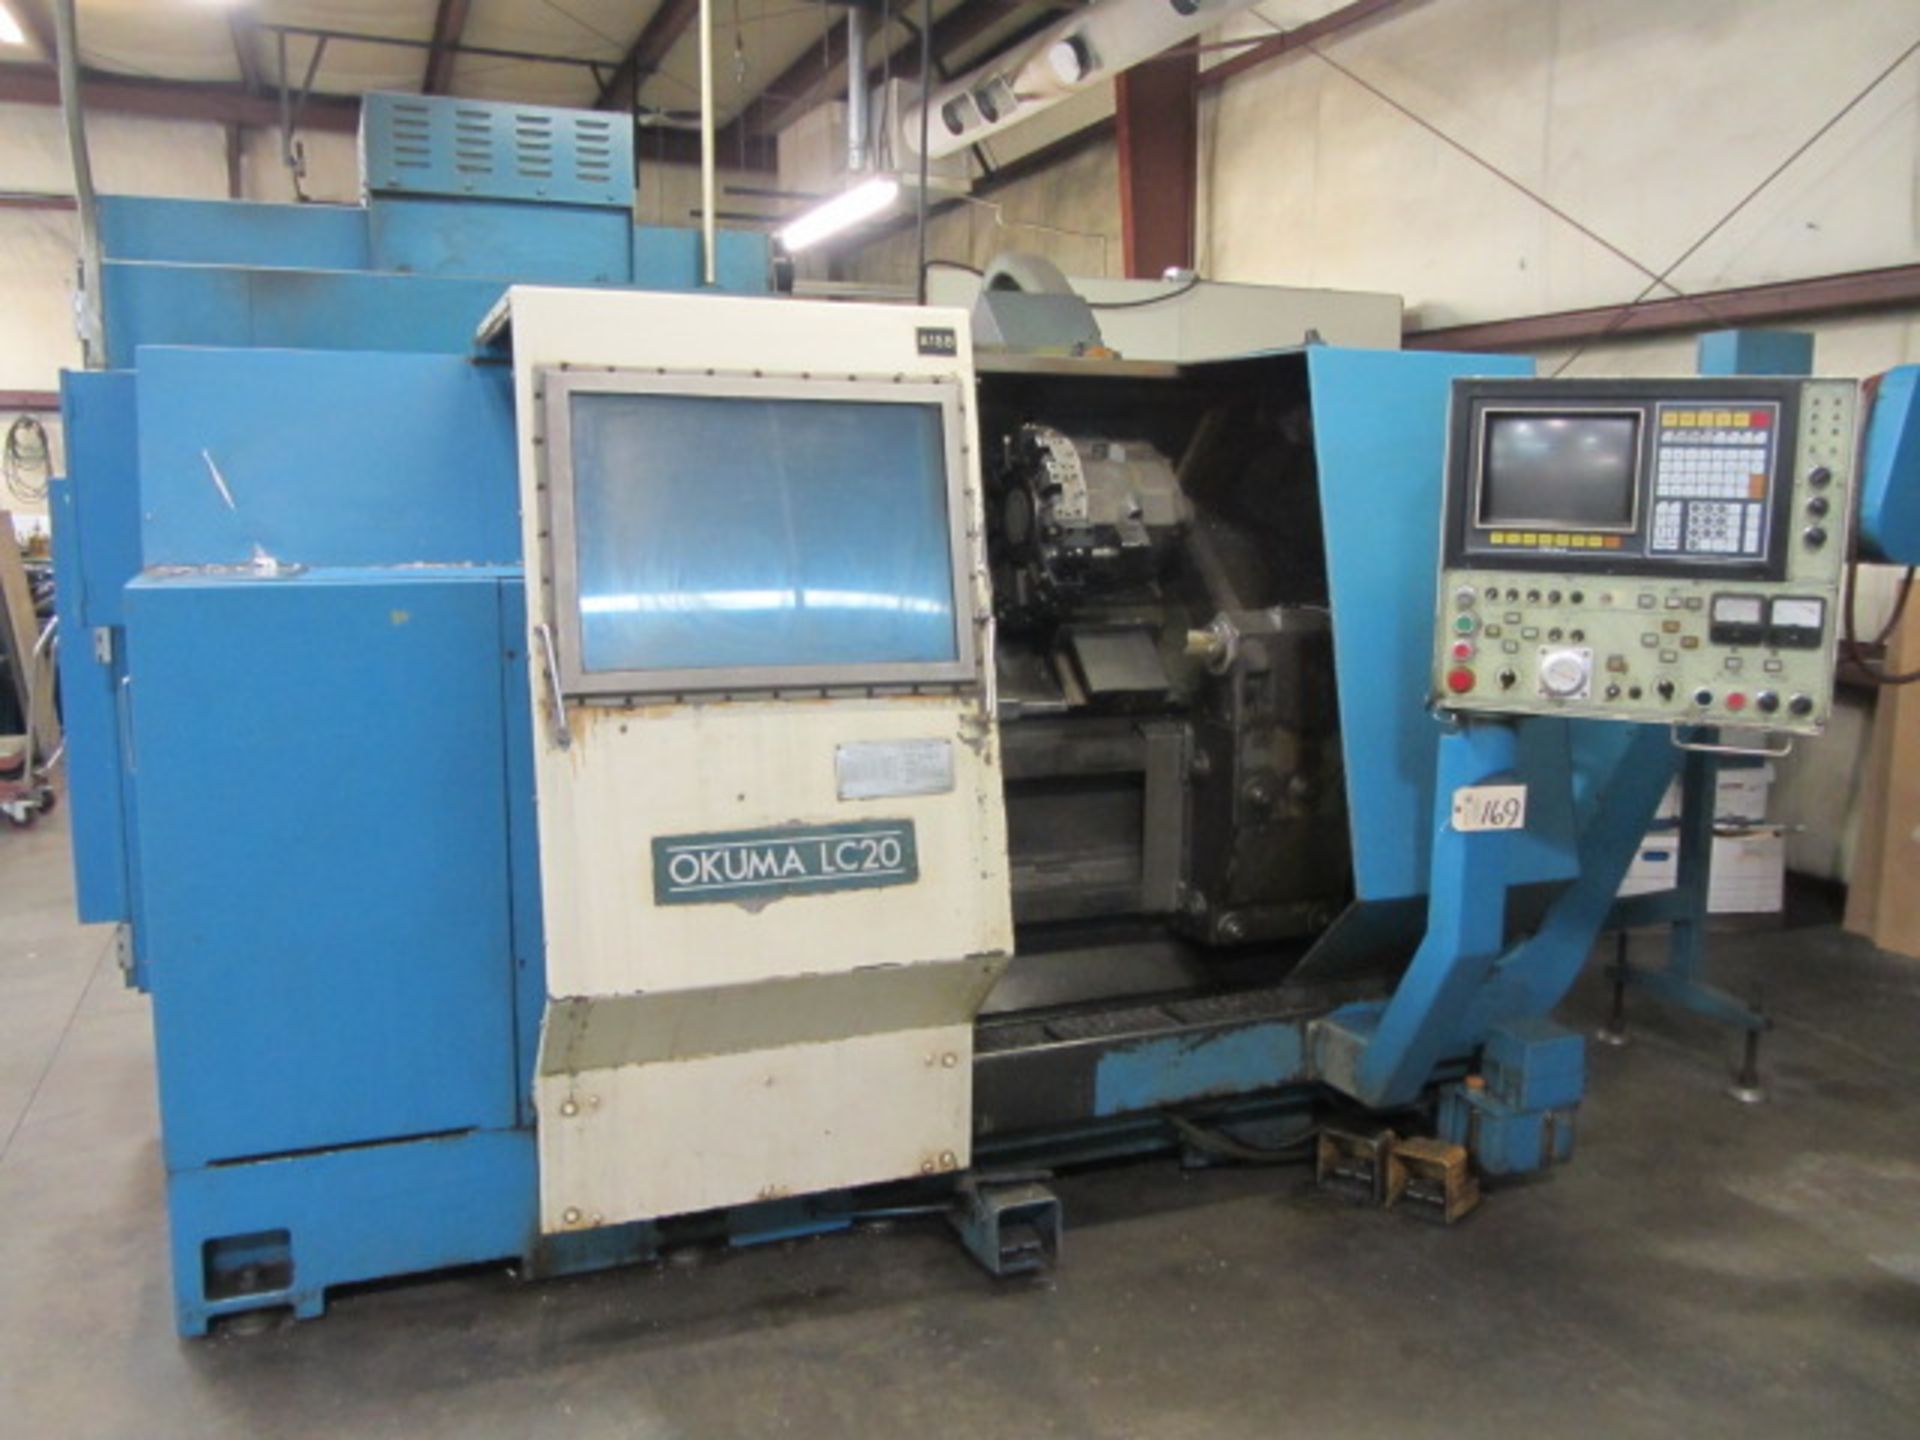 Okuma LC20 CNC Turning Center with 10'' 3-Jaw Power Chuck, 24'' Max Distance to Tailstock, Spindle - Image 8 of 8